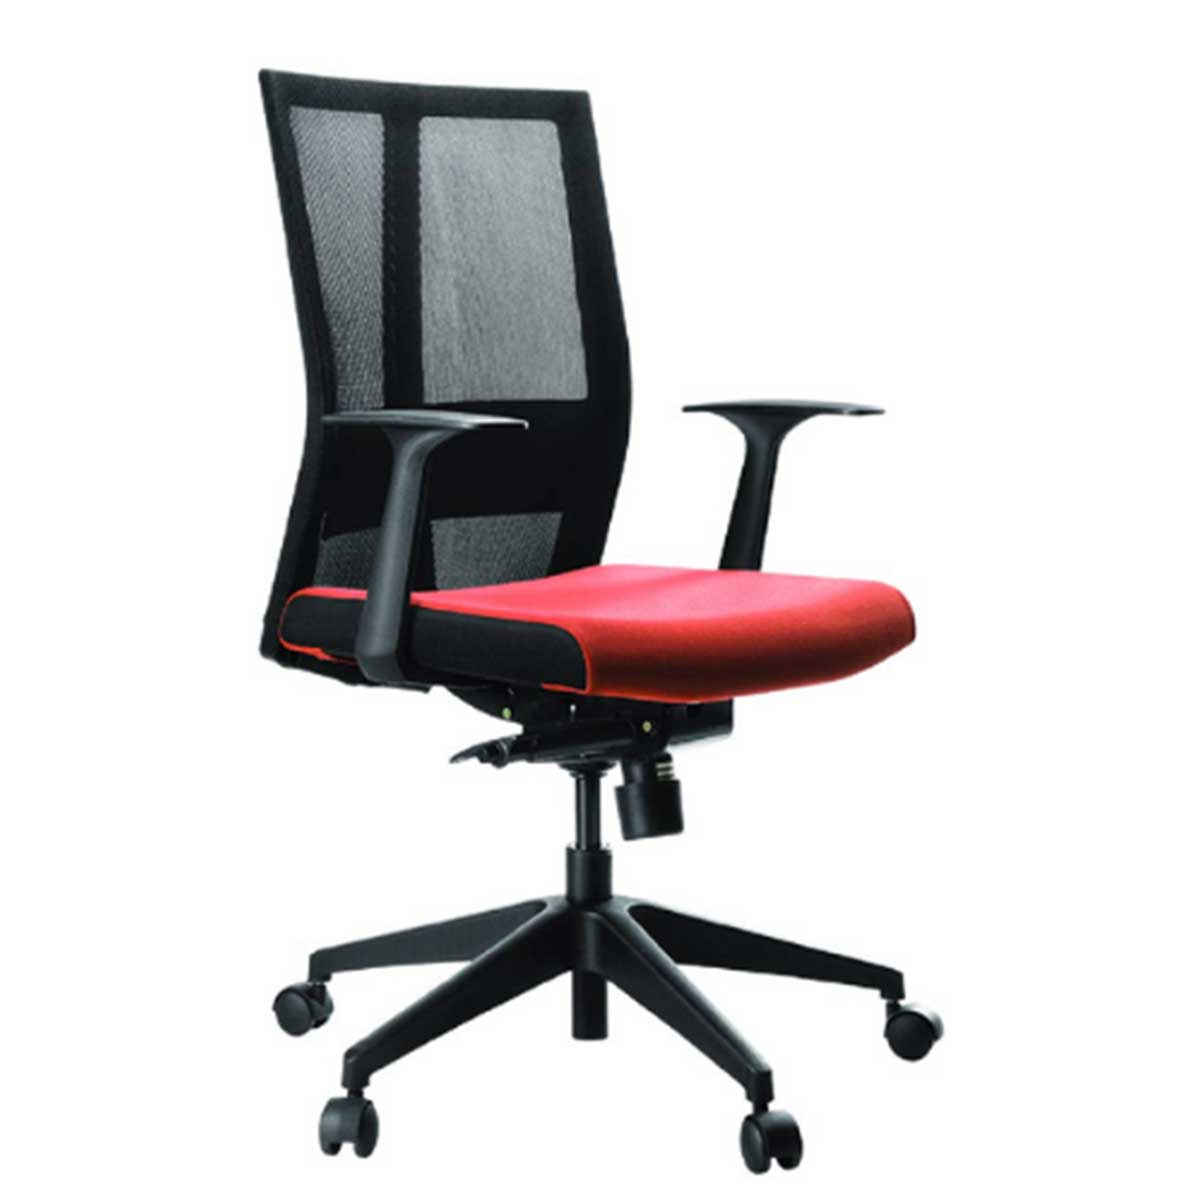 Conference Chair Manufacturers, Suppliers in Sahibabad